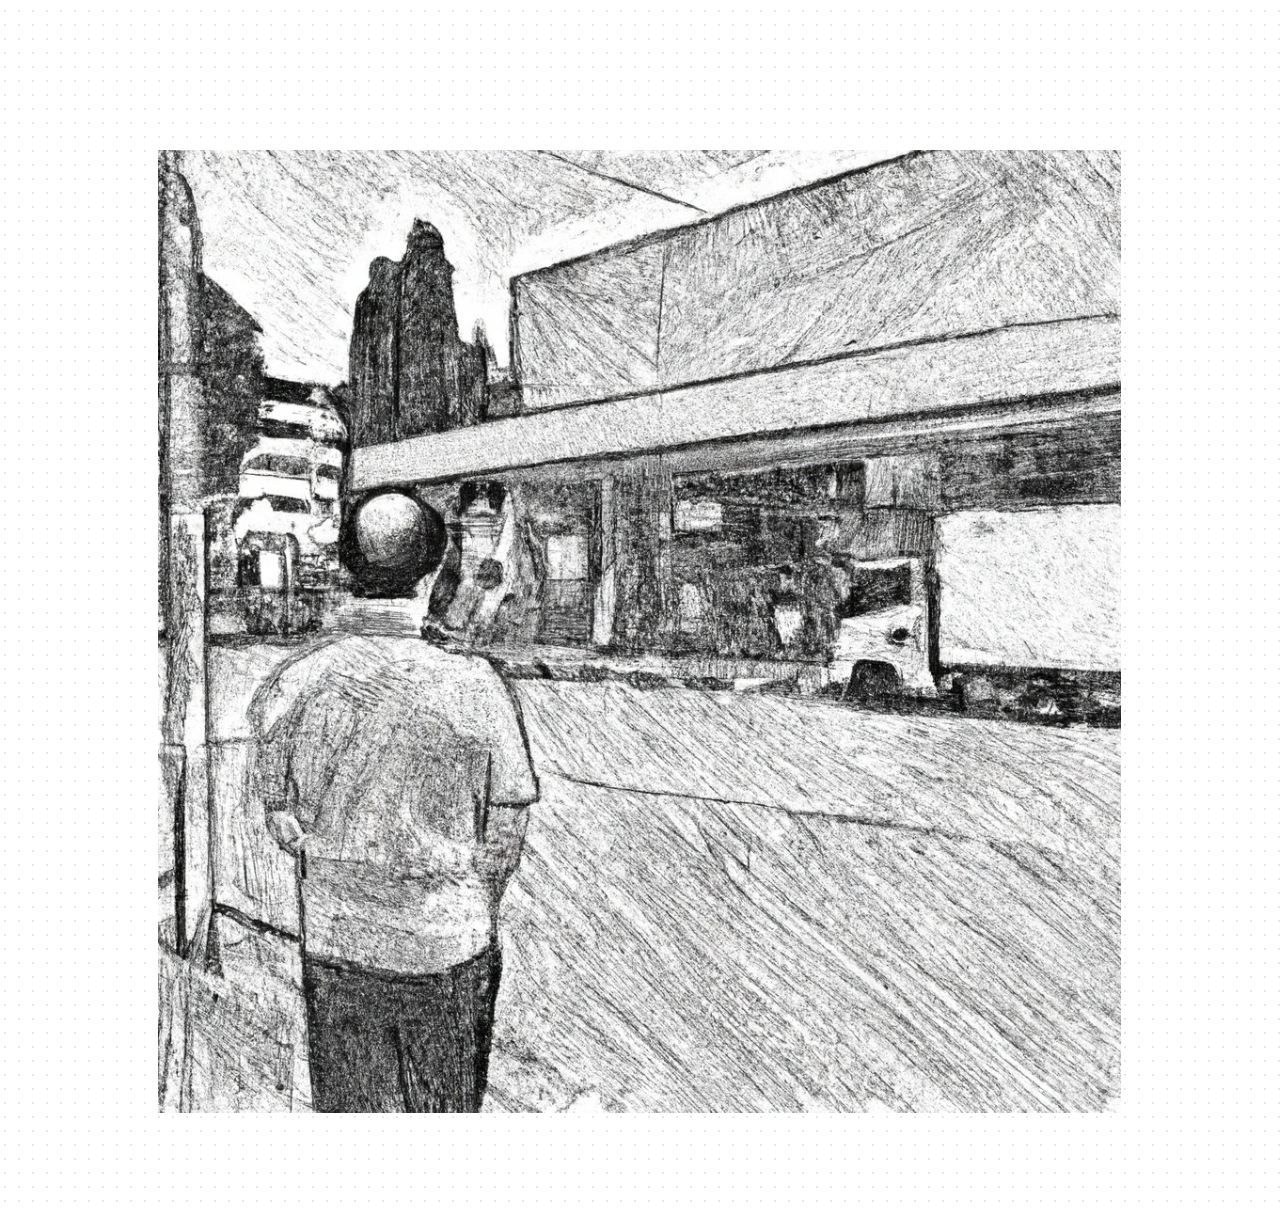 Dall-e2 Query: hatching style, street view, person looking at store up the road